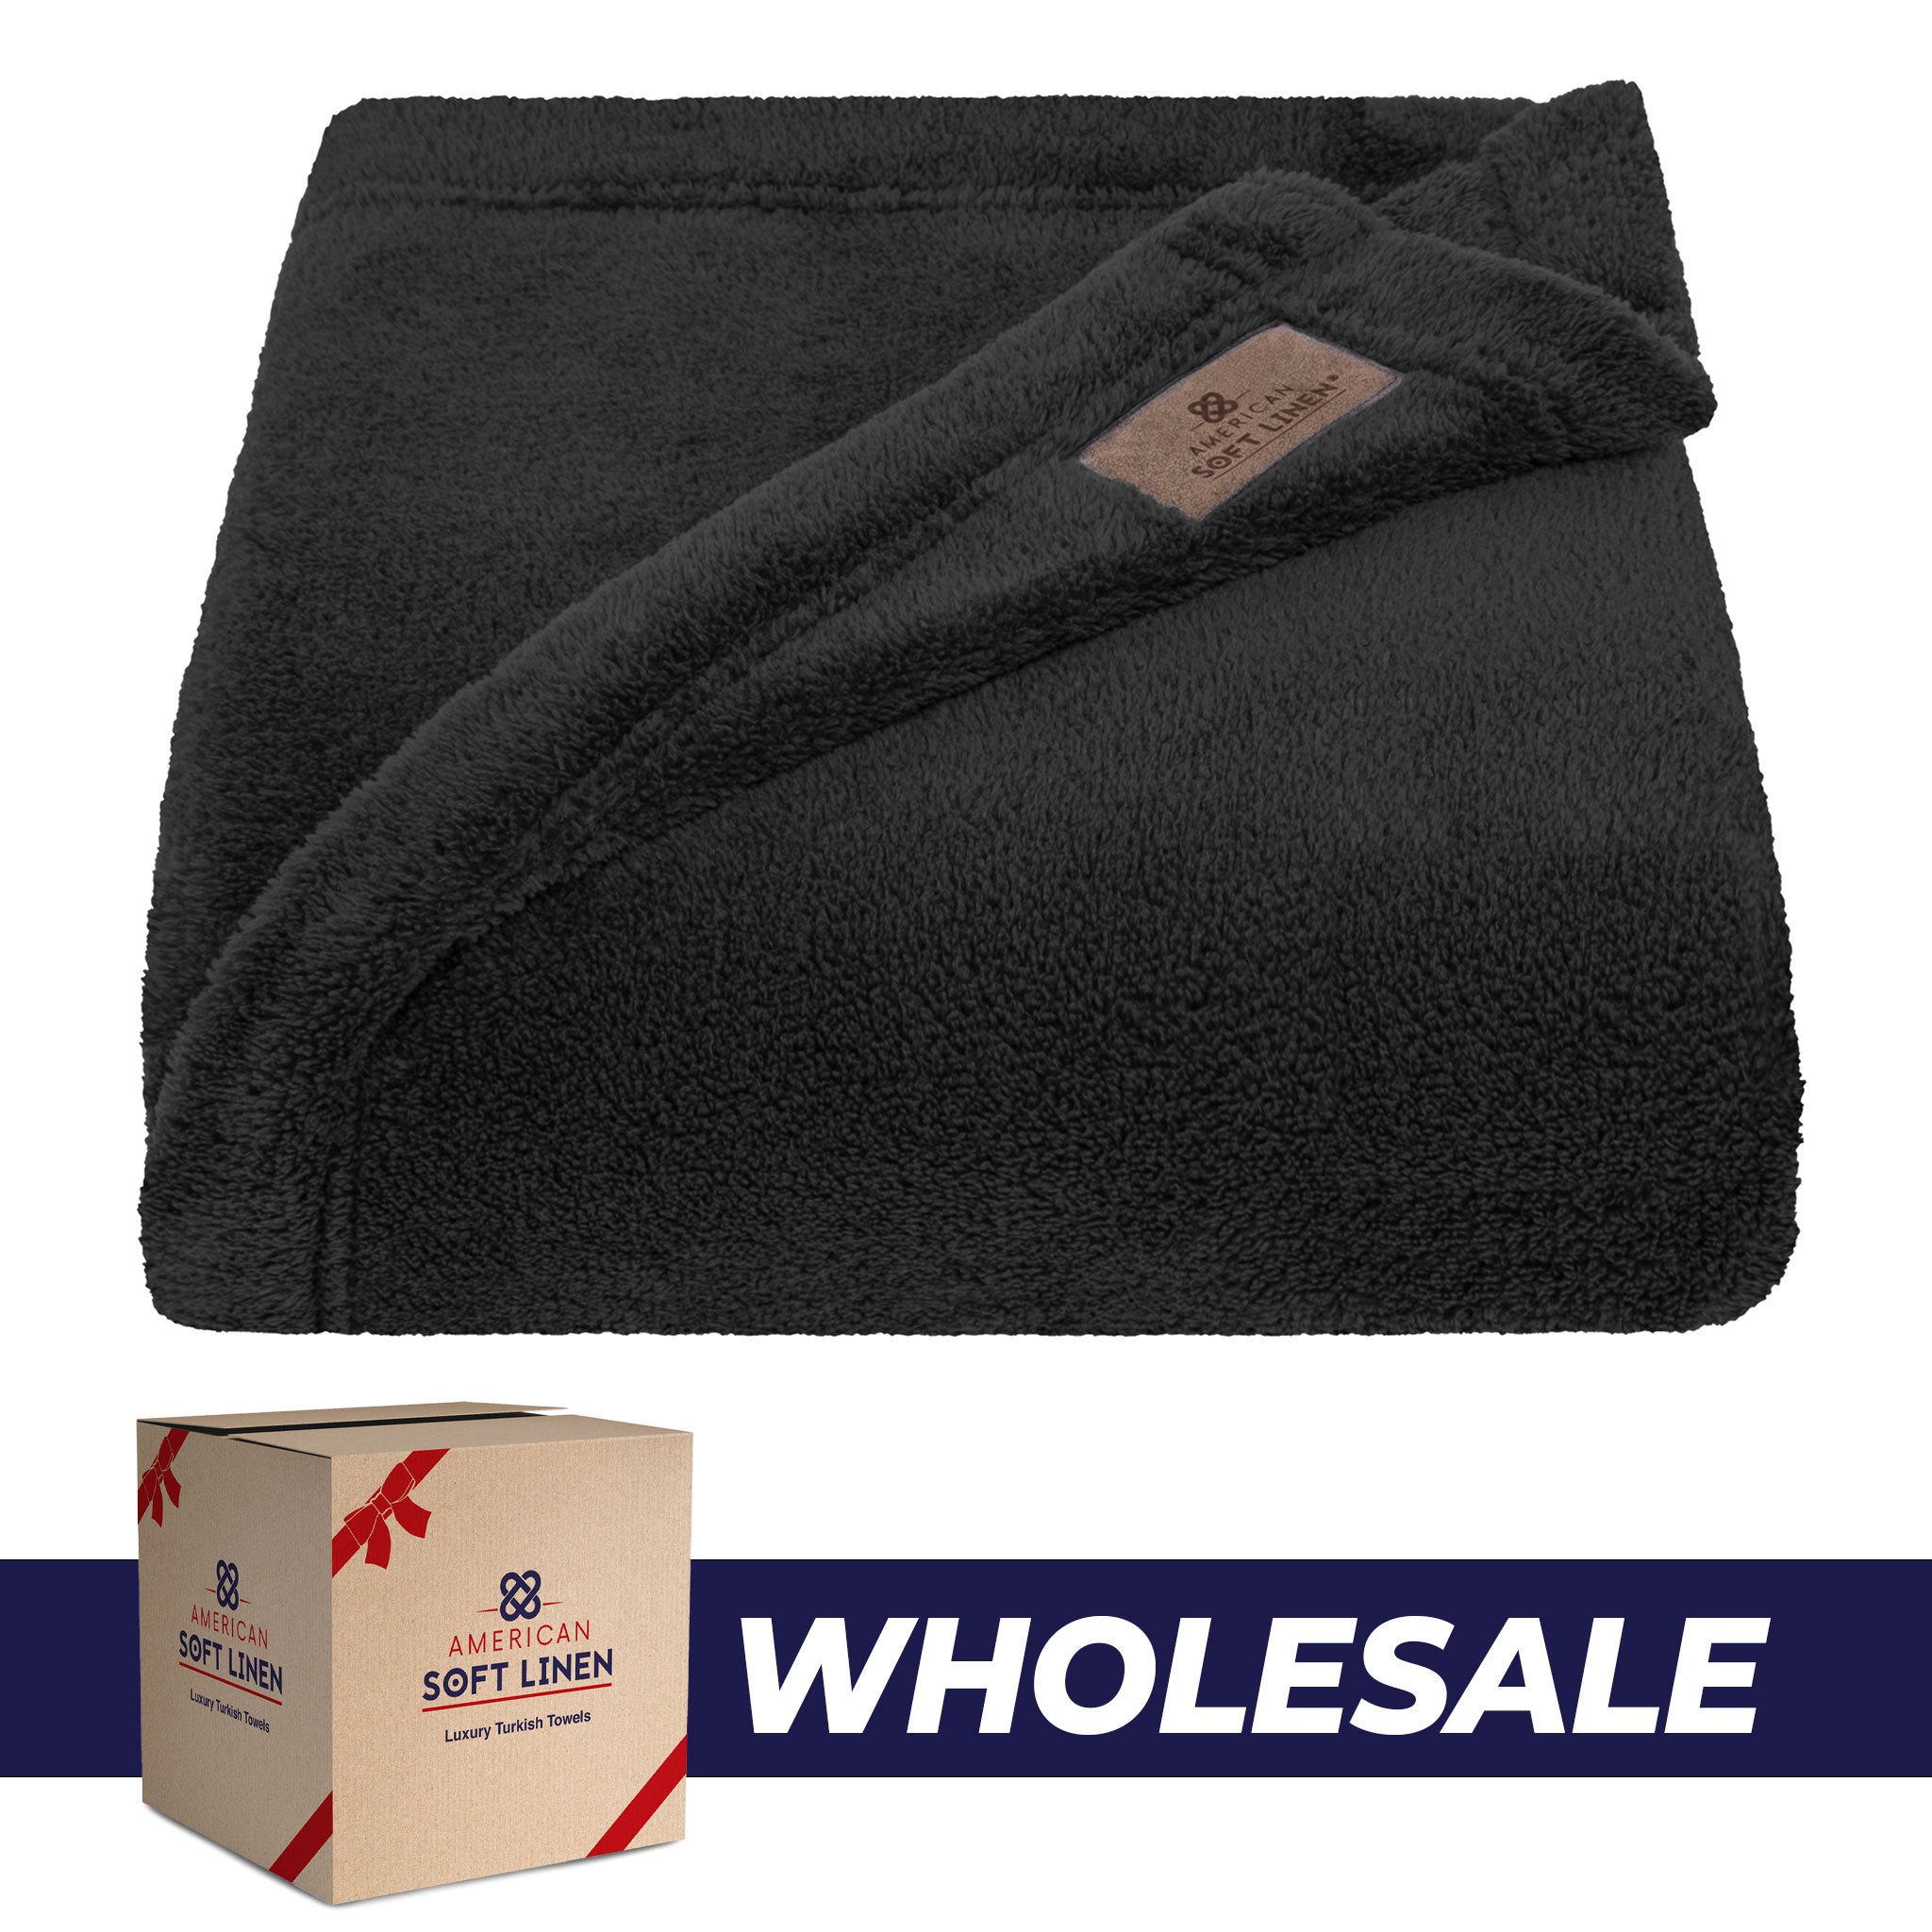 American Soft Linen - Bedding Fleece Blanket - Wholesale - 24 Set Case Pack - Throw Size 50x60 inches - Black - 0